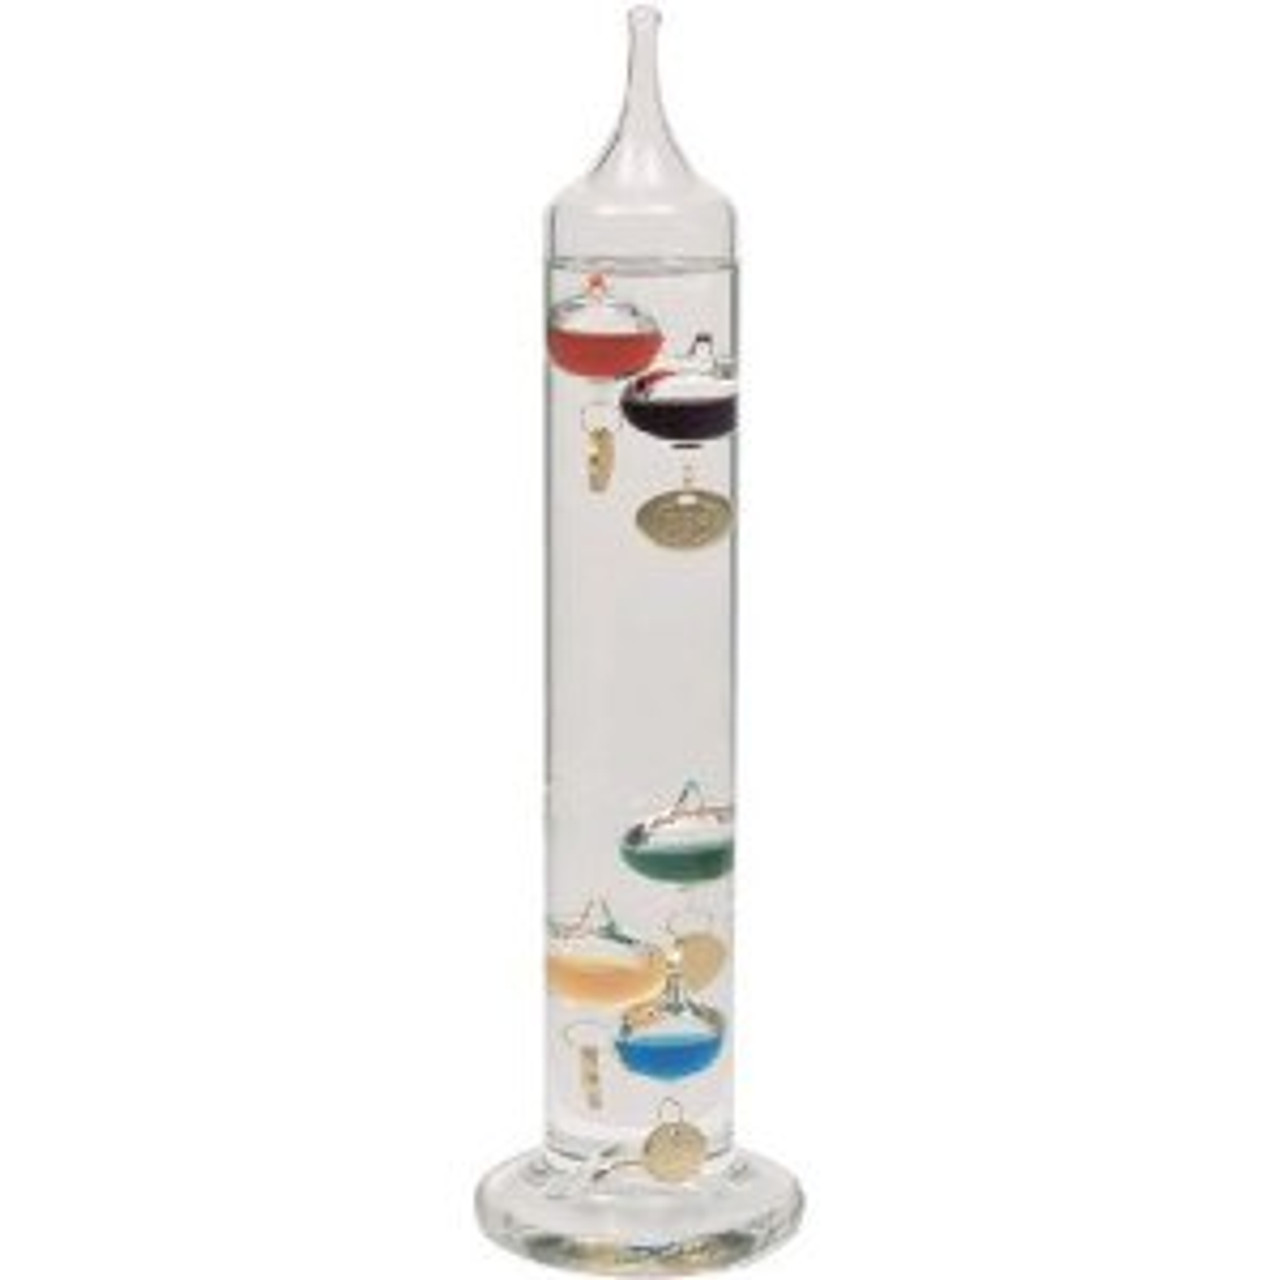 Lily's Home Analog Weather Station, with Galileo Thermometer, Glass  Barometer, and Analog Hygrometer, 5 Multi-Colored Spheres (10.5 in x 12 in)